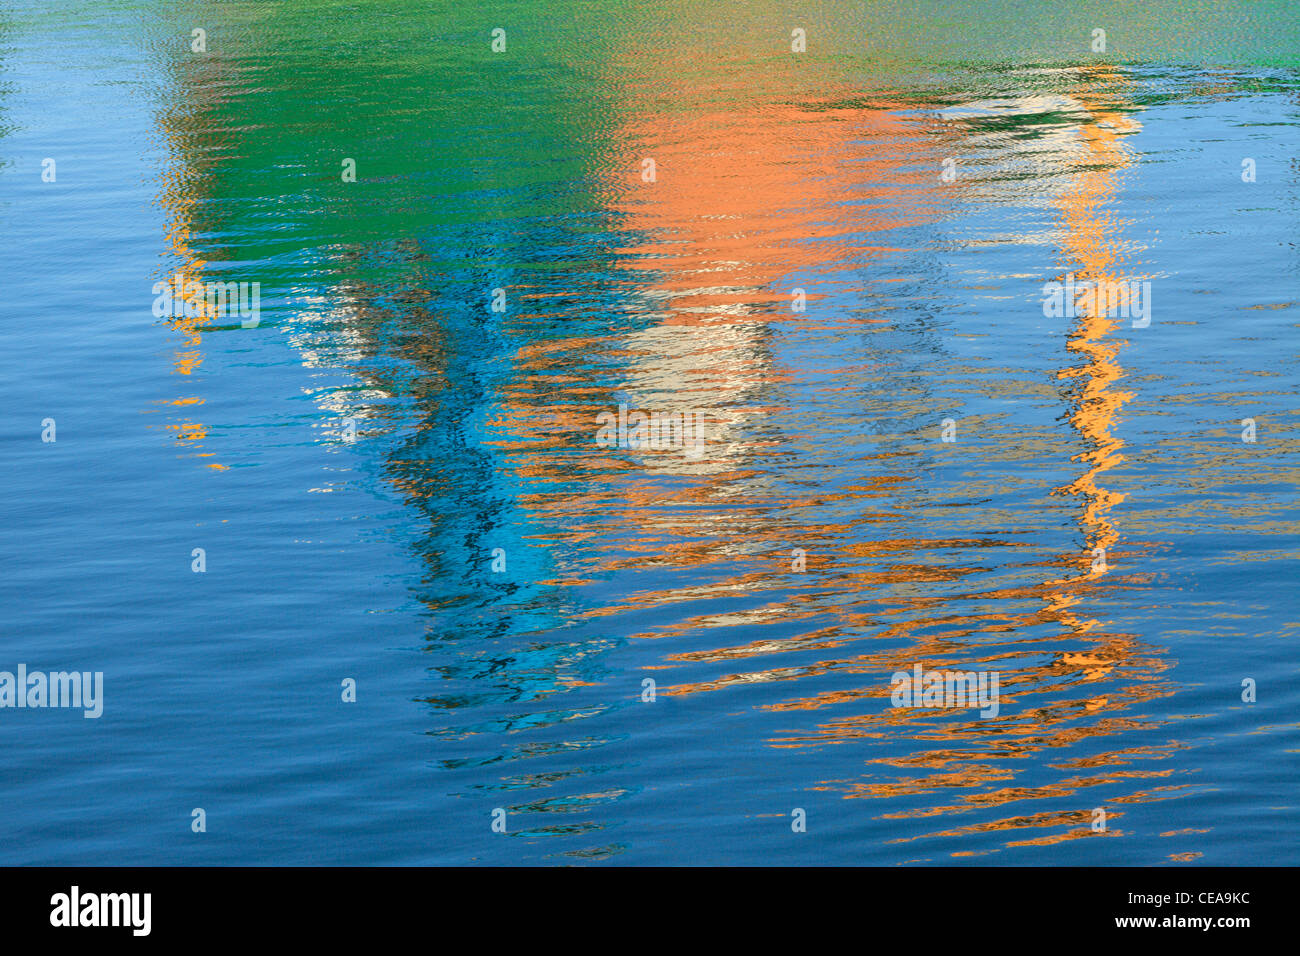 Reflections of a ship loading at Blythe Quay make for a brightly colored abstract Stock Photo